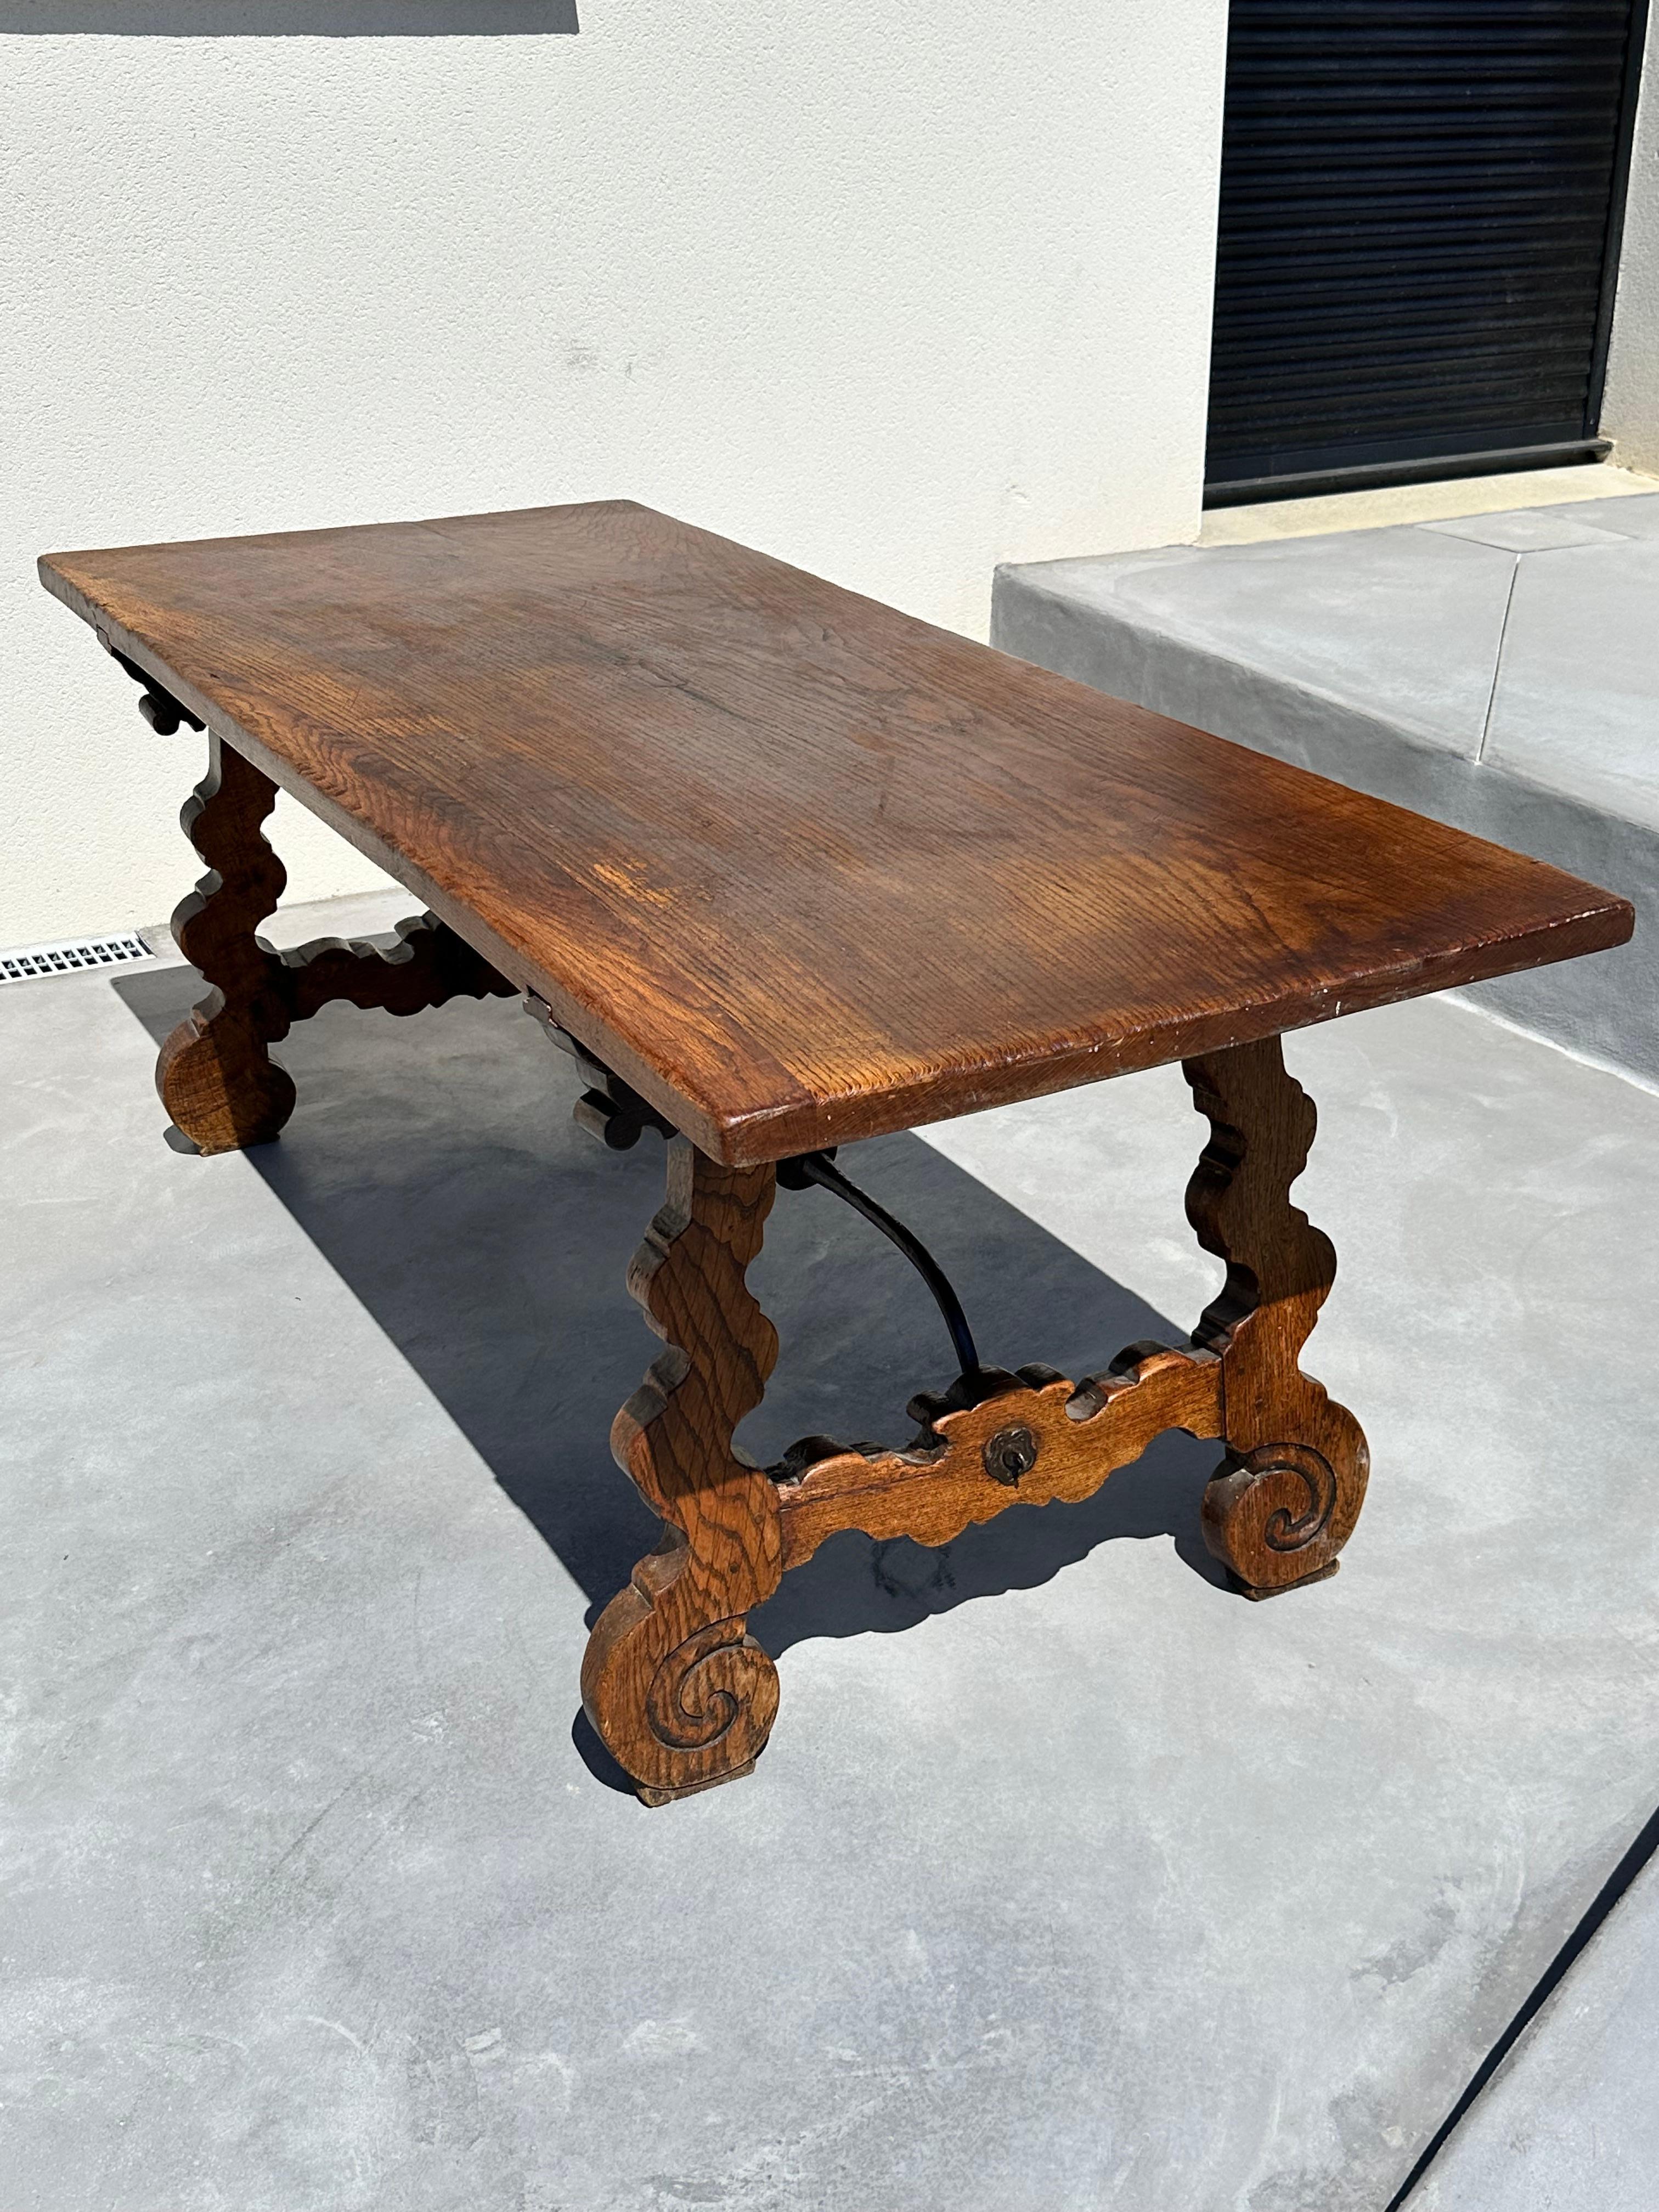 Spain regionalist, refectory table.

Solid walnut and wrought iron.
The top supported by sulpted uprights in the shape of a lyre joined by wrought iron rods: accidents, traces of worms (the table has been treated).

Nice patina.

19th century.